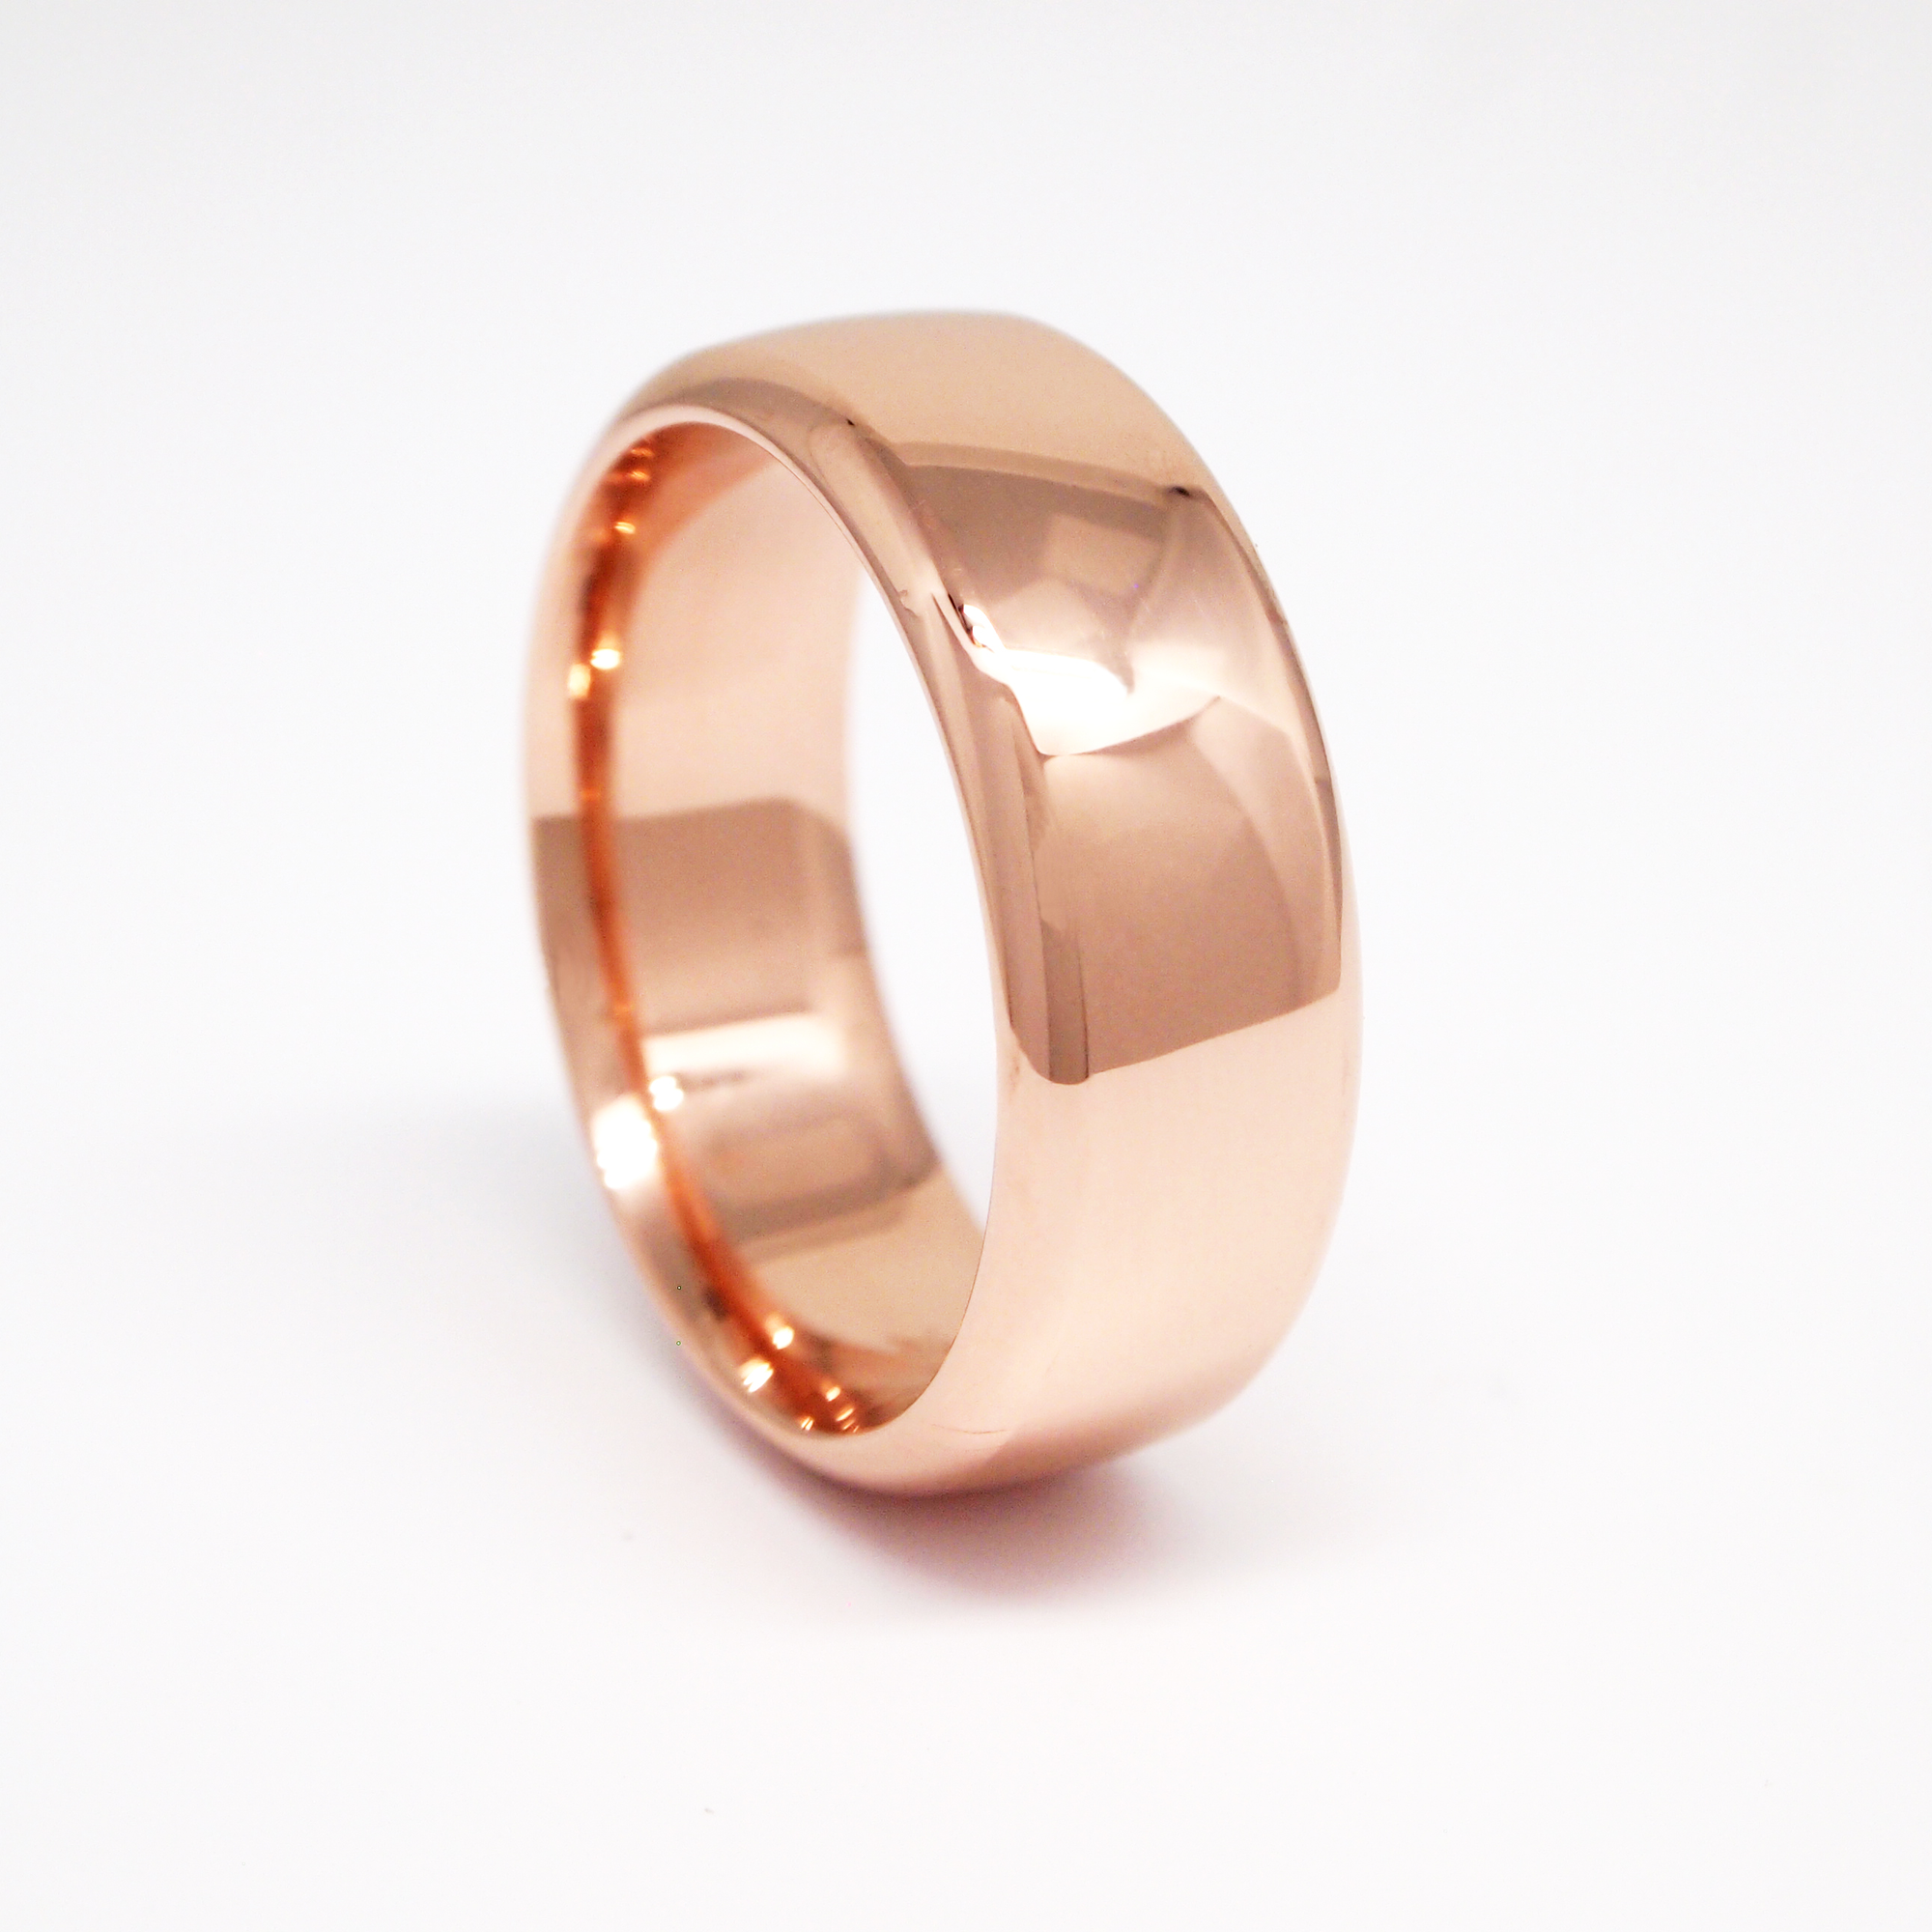 14K Rose Gold Heavy 8mm Low Dome High Polish Men's Wedding Band